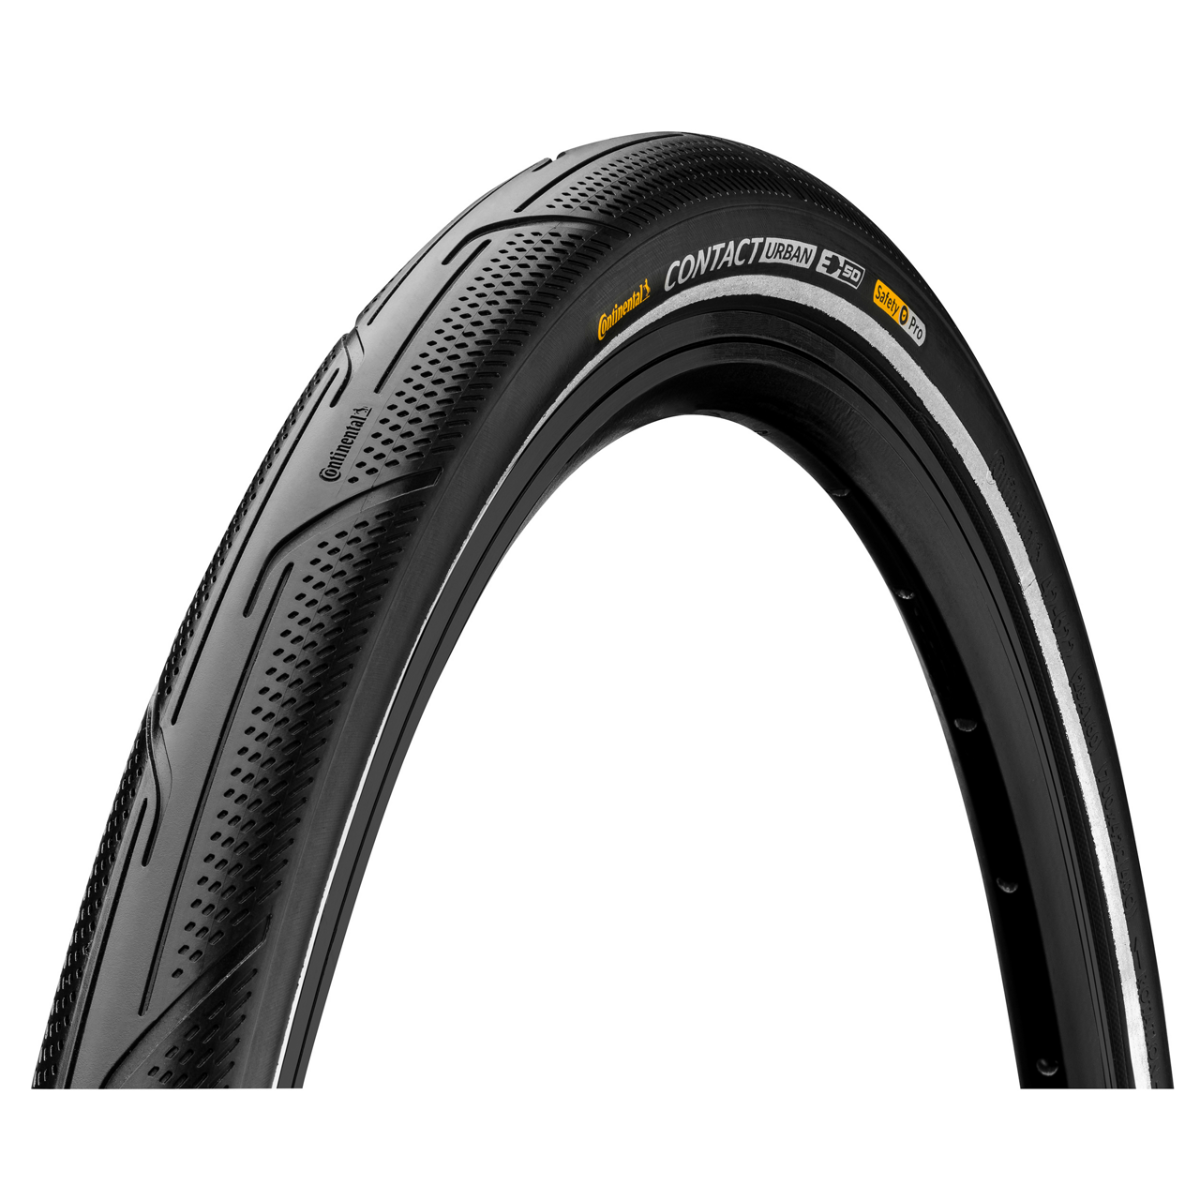 Bicycle tyre  Continental 42-622 CONTACT Urban black/black reflex wire